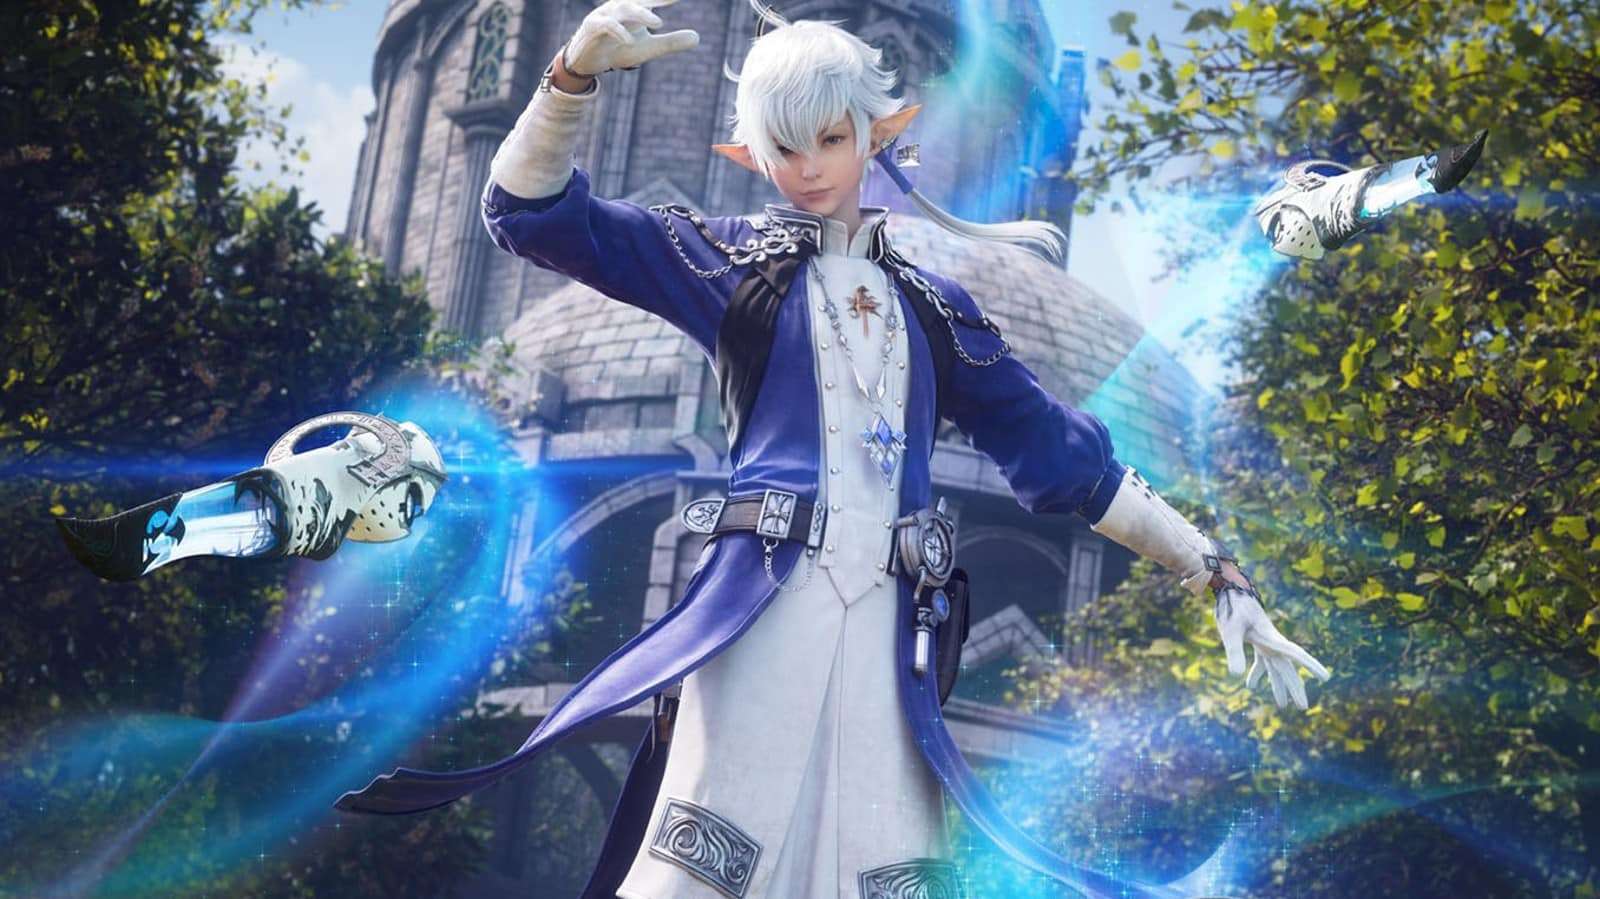 Final Fantasy elf boy casts spells and throws knives as camera